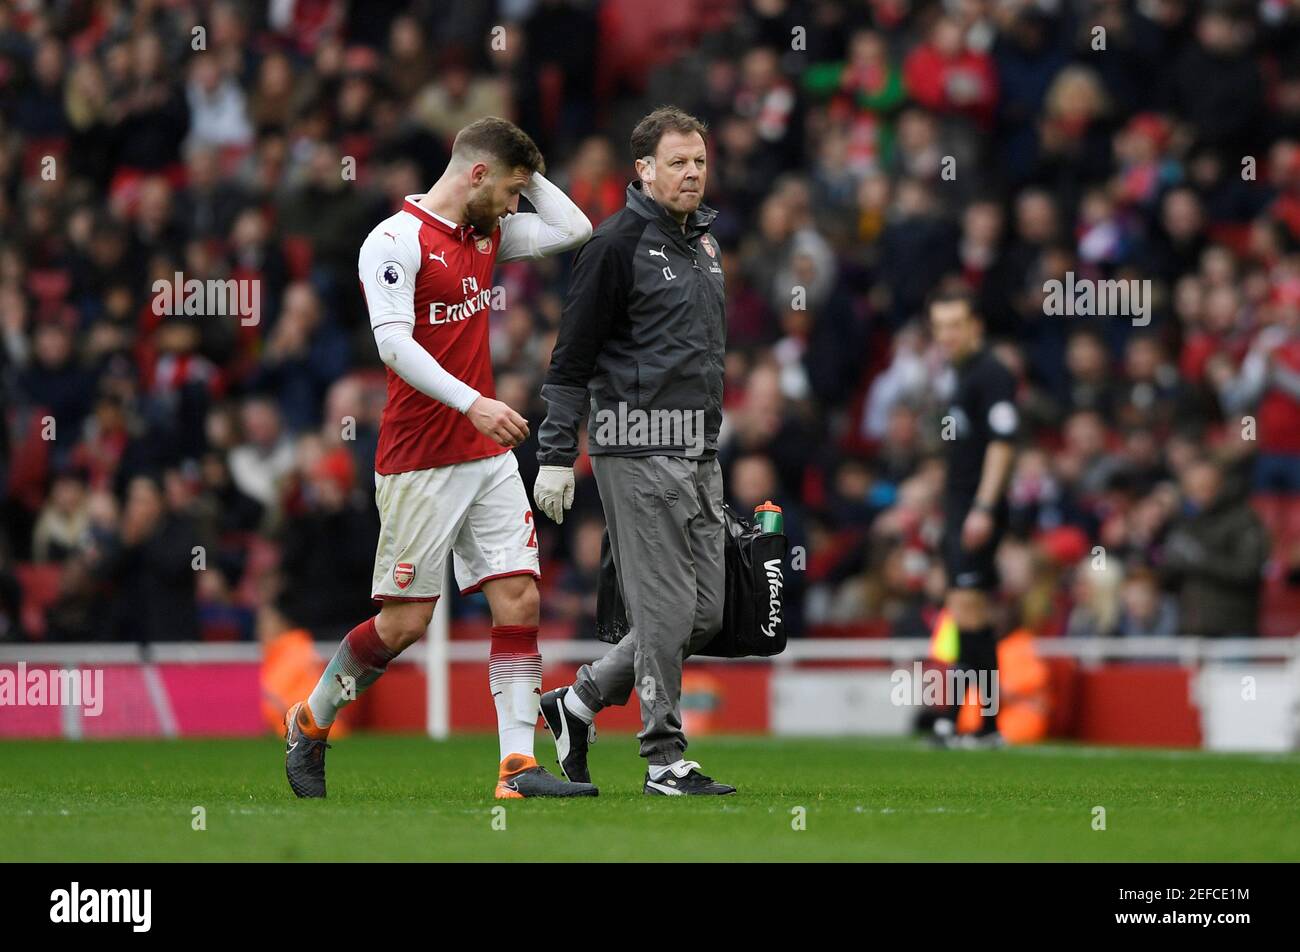 Soccer Football - Premier League - Arsenal vs Watford - Emirates Stadium, London, Britain - March 11, 2018   Arsenal's Shkodran Mustafi comes off injured             Action Images via Reuters/Tony O'Brien    EDITORIAL USE ONLY. No use with unauthorized audio, video, data, fixture lists, club/league logos or 'live' services. Online in-match use limited to 75 images, no video emulation. No use in betting, games or single club/league/player publications.  Please contact your account representative for further details. Stock Photo